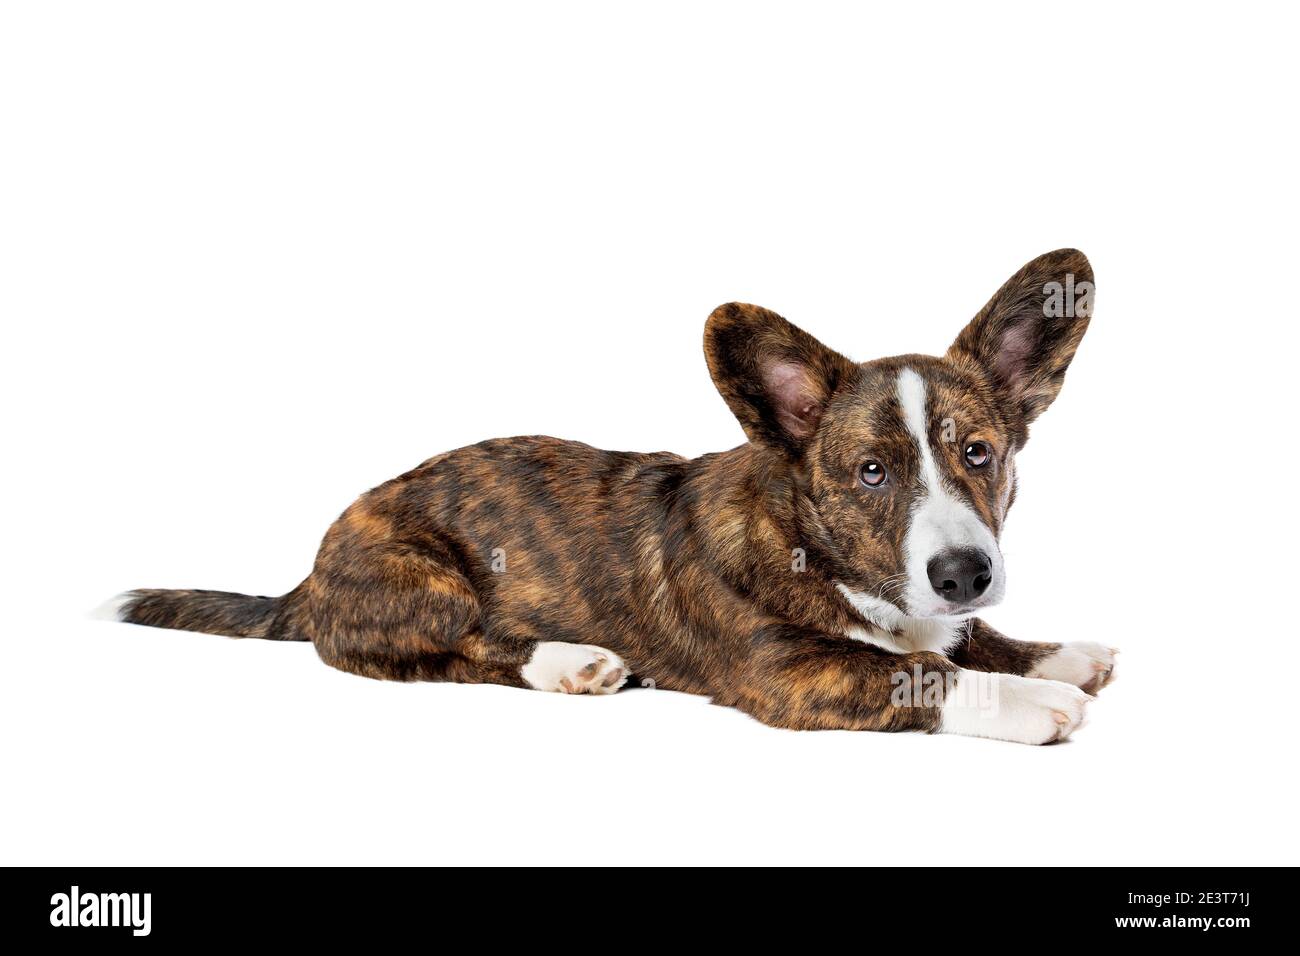 Brindle and white Cardigan Welsh Corgi dog in front of a white background  Stock Photo - Alamy